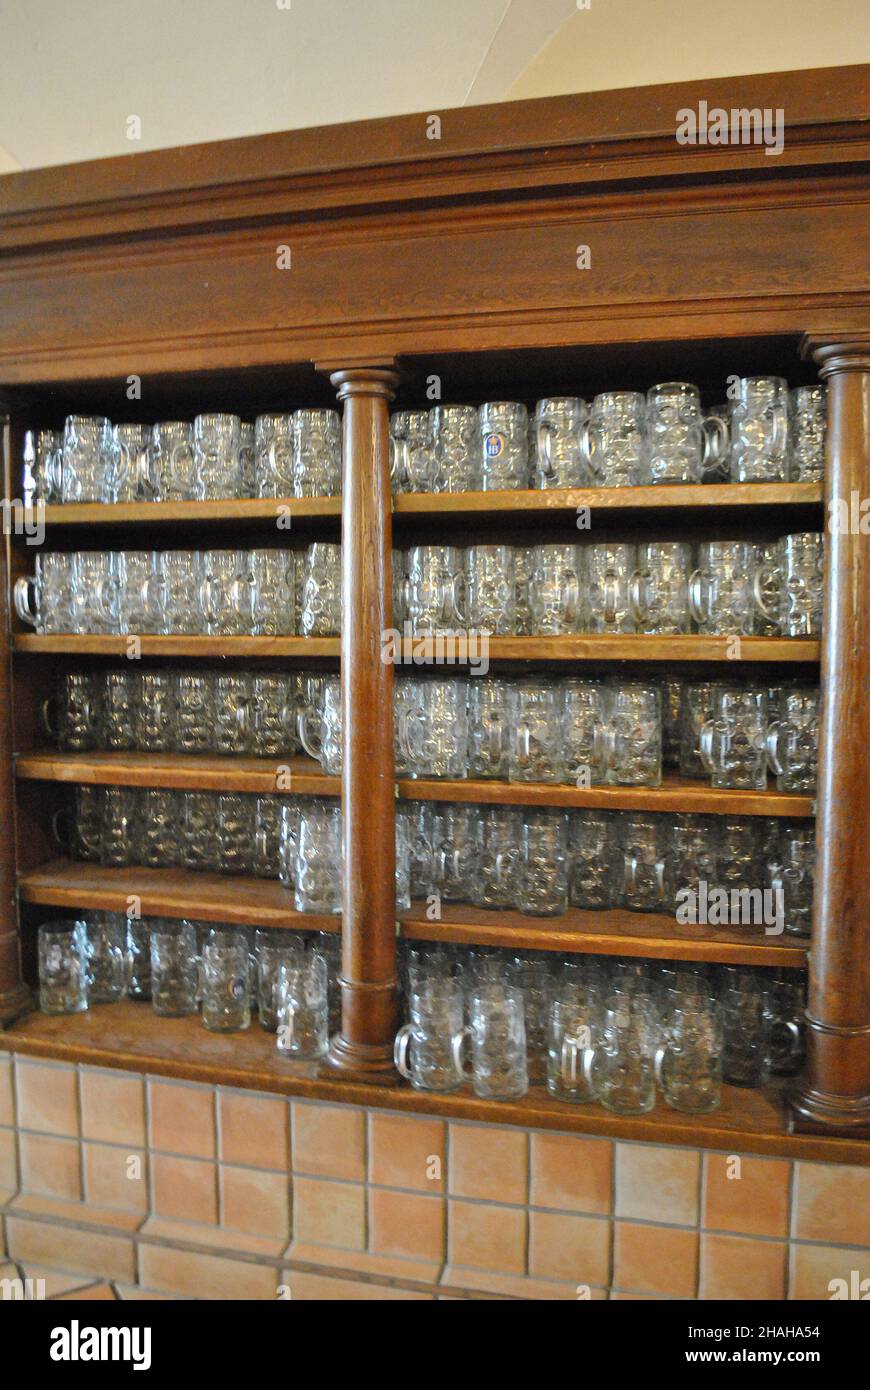 Large open decorative cabinet with wooden shelves for storing clean beer mugs stands in a brasserie Stock Photo